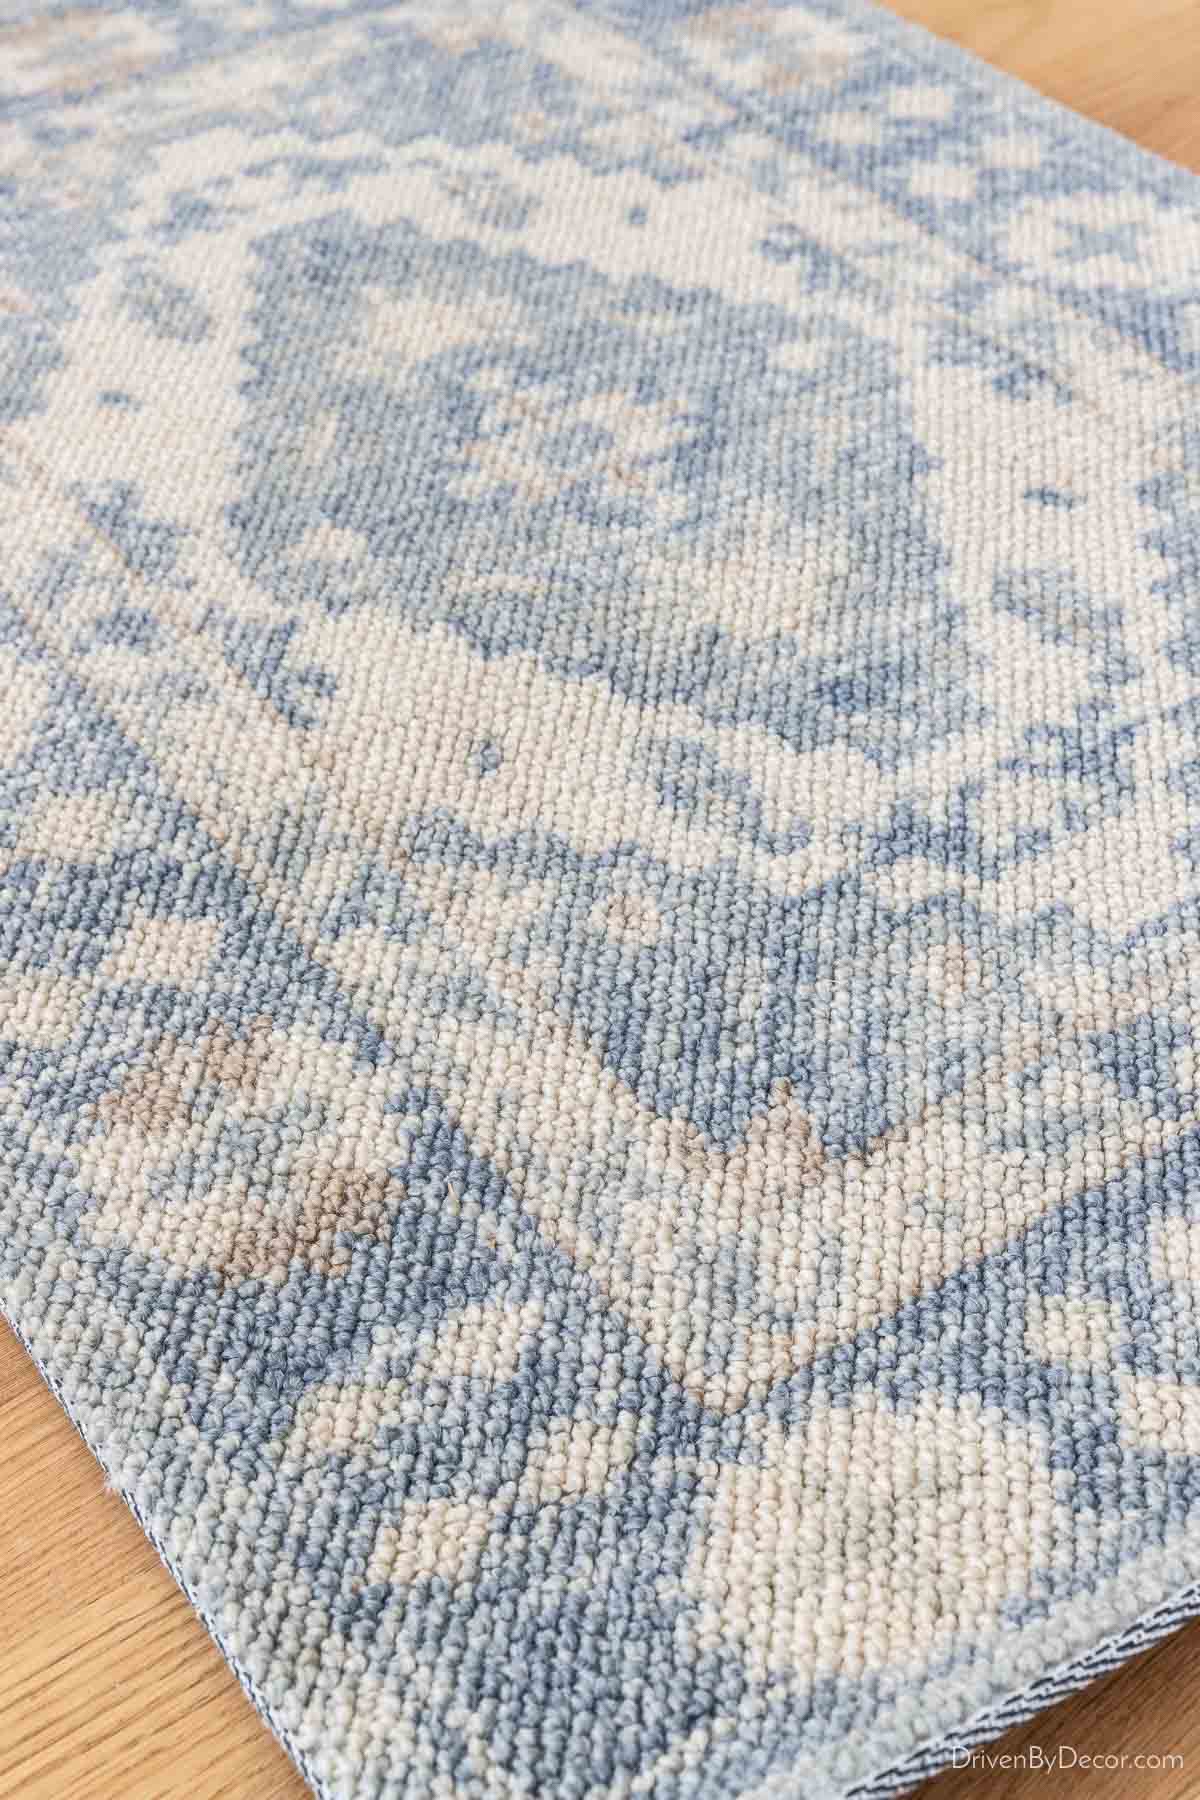 Oriental style rug with blues that are perfect for a living room